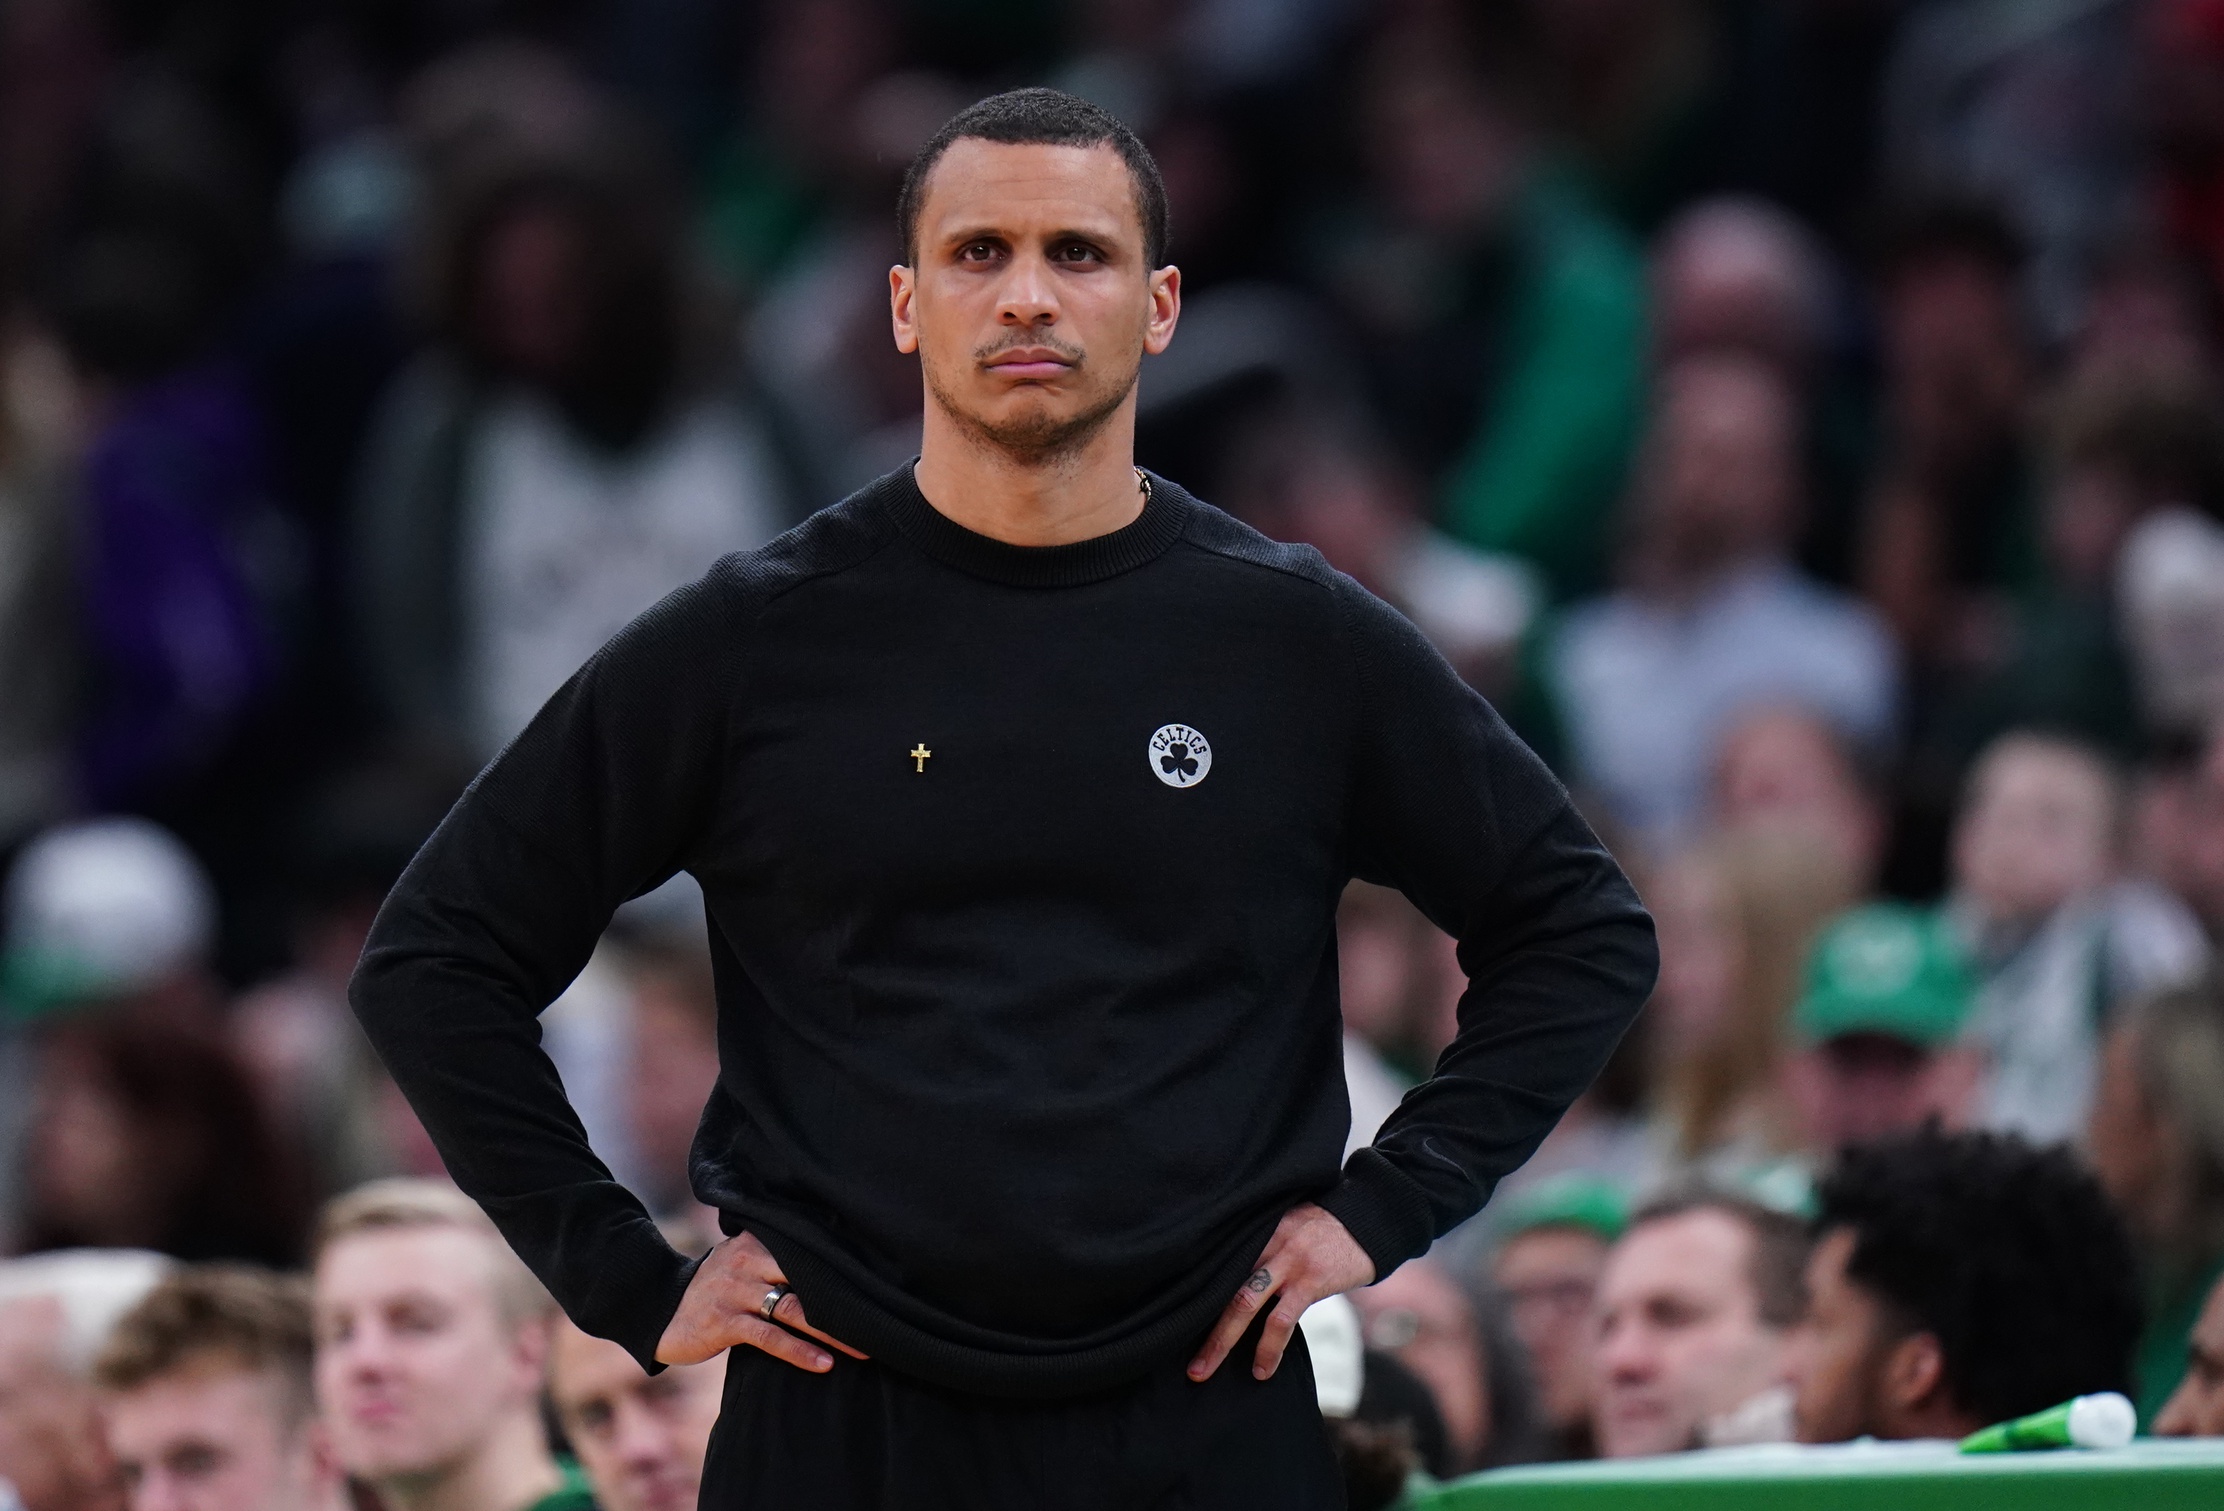 Boston Celtics head coach Joe Mazzulla watches from the sideline as they take on the Utah Jazz at TD Garden.